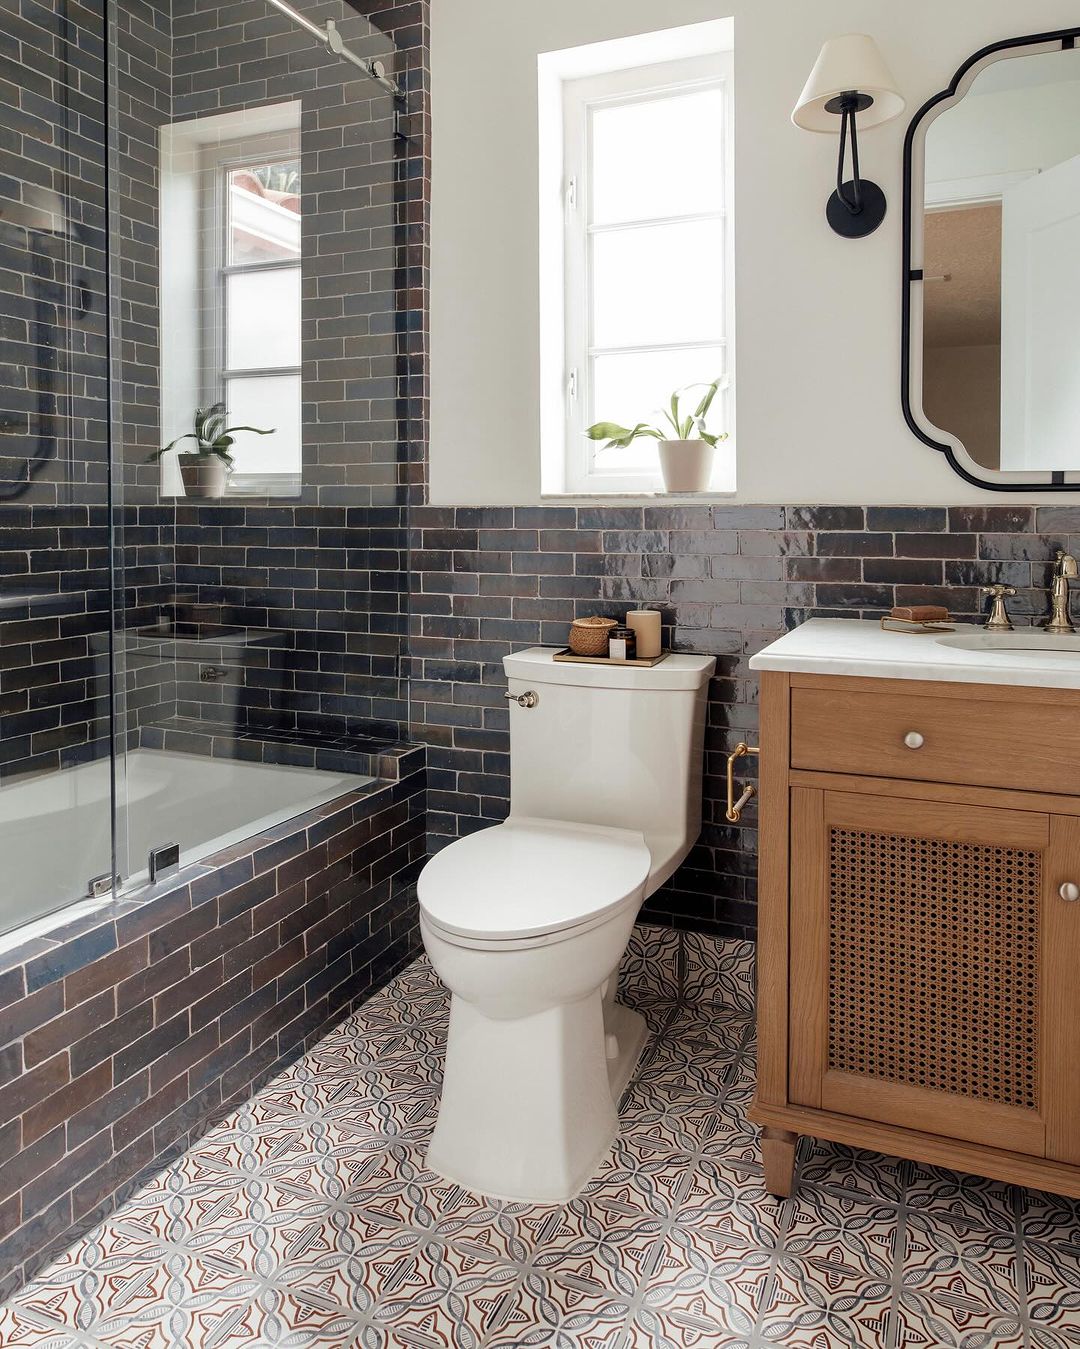 Dark Tiles and Natural Elements for a Cosy Small Bathroom